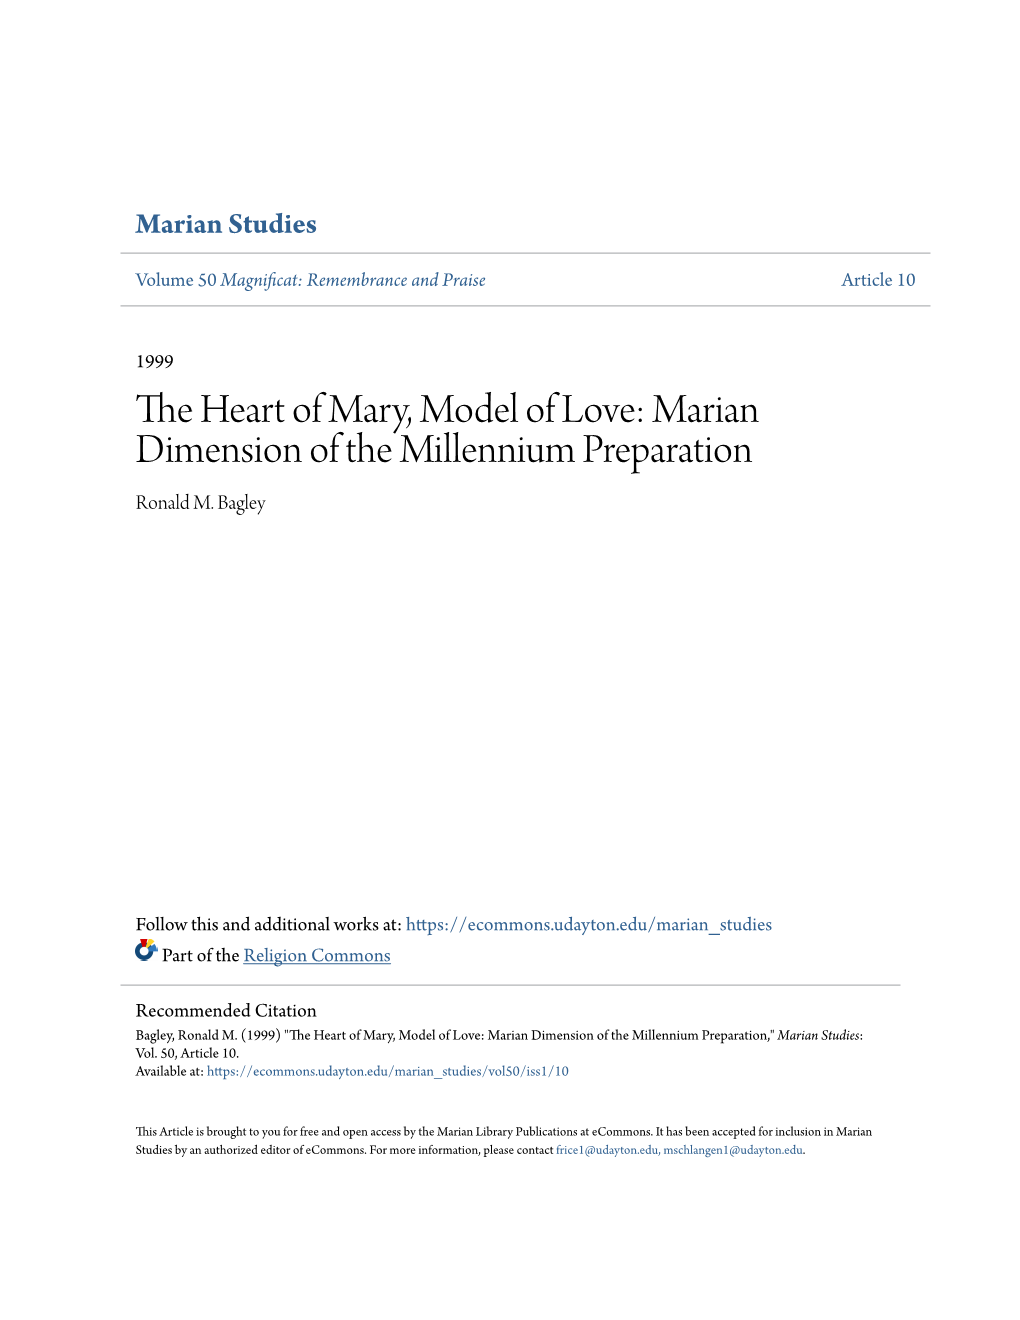 The Heart of Mary, Model of Love: Marian Dimension of the Millennrjm Preparation